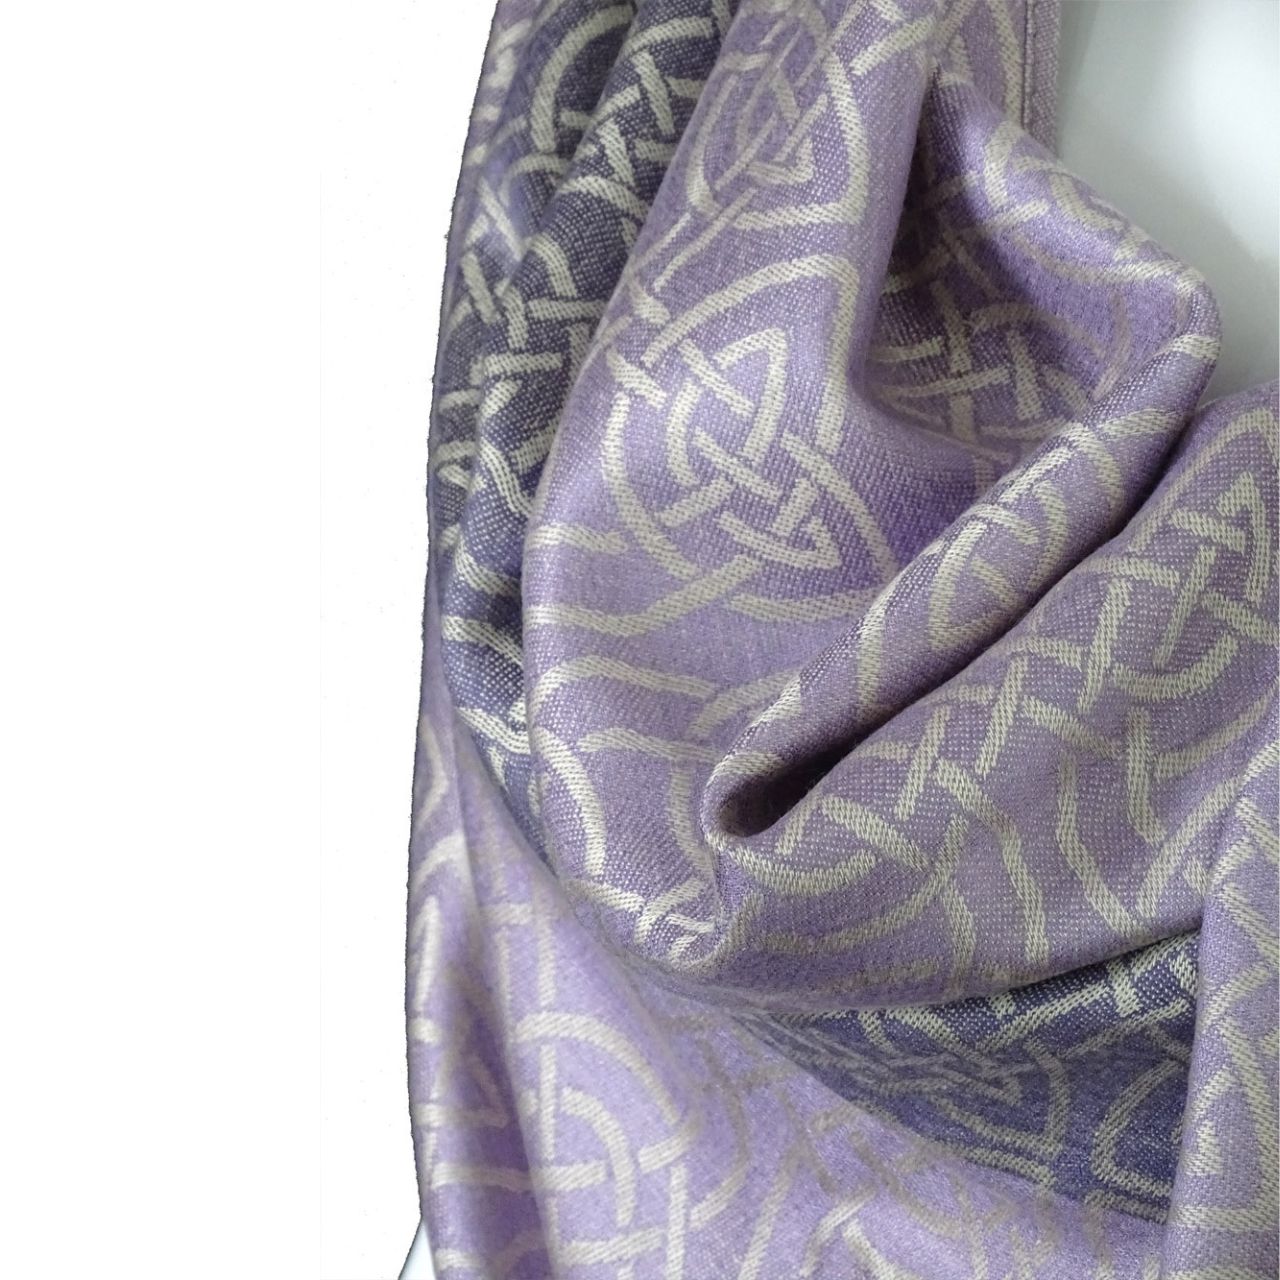 Mulligans Ireland Inis Cealtra Celtic Pashmina Shawl  Named after the islands of Ireland, and inspired by their stories and history, our Island Range of shawls and scarves is a fusion of modern Irish design and colour palette together with the traditional Celtic knot weave or ‘snaidhm celtic’ in Irish/Gaelic.